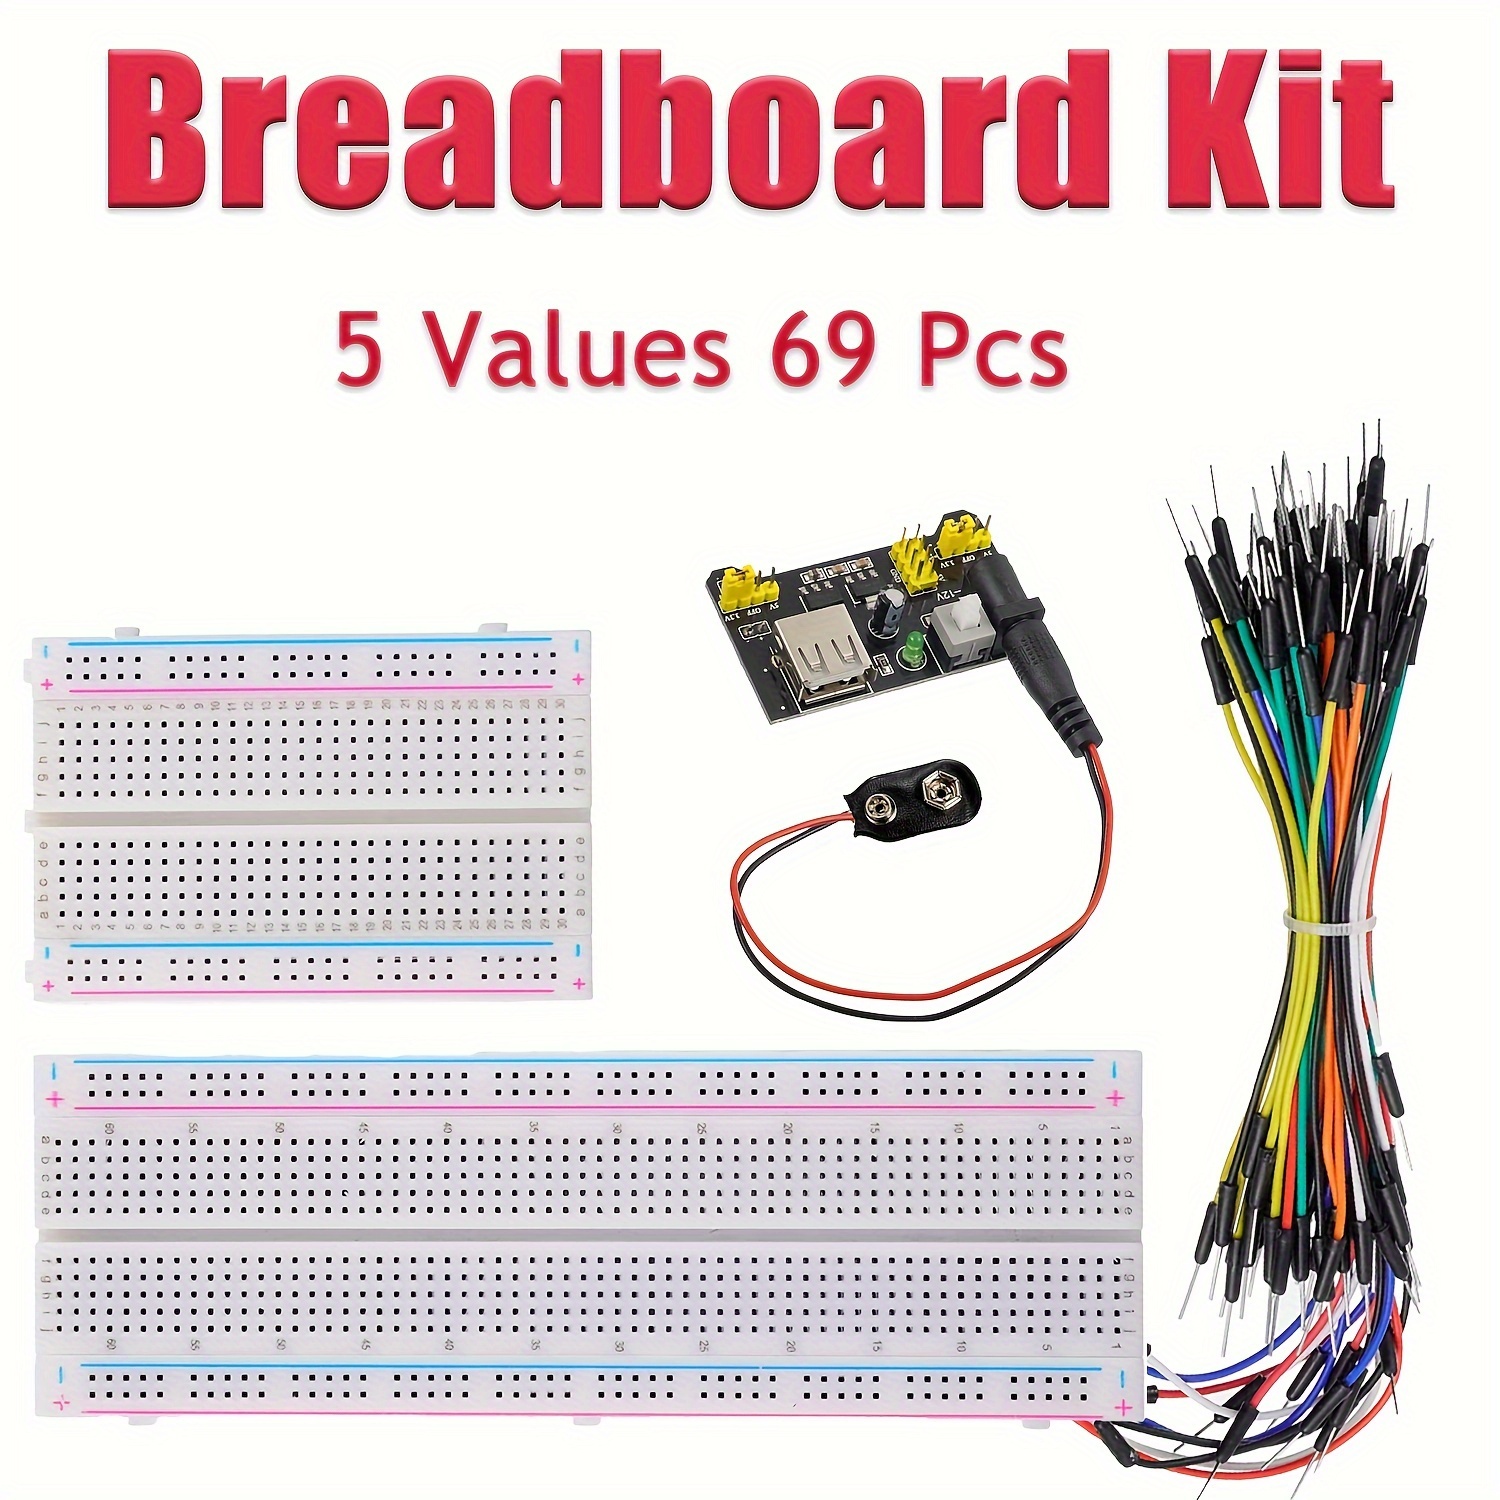 How to Use a Breadboard Kit